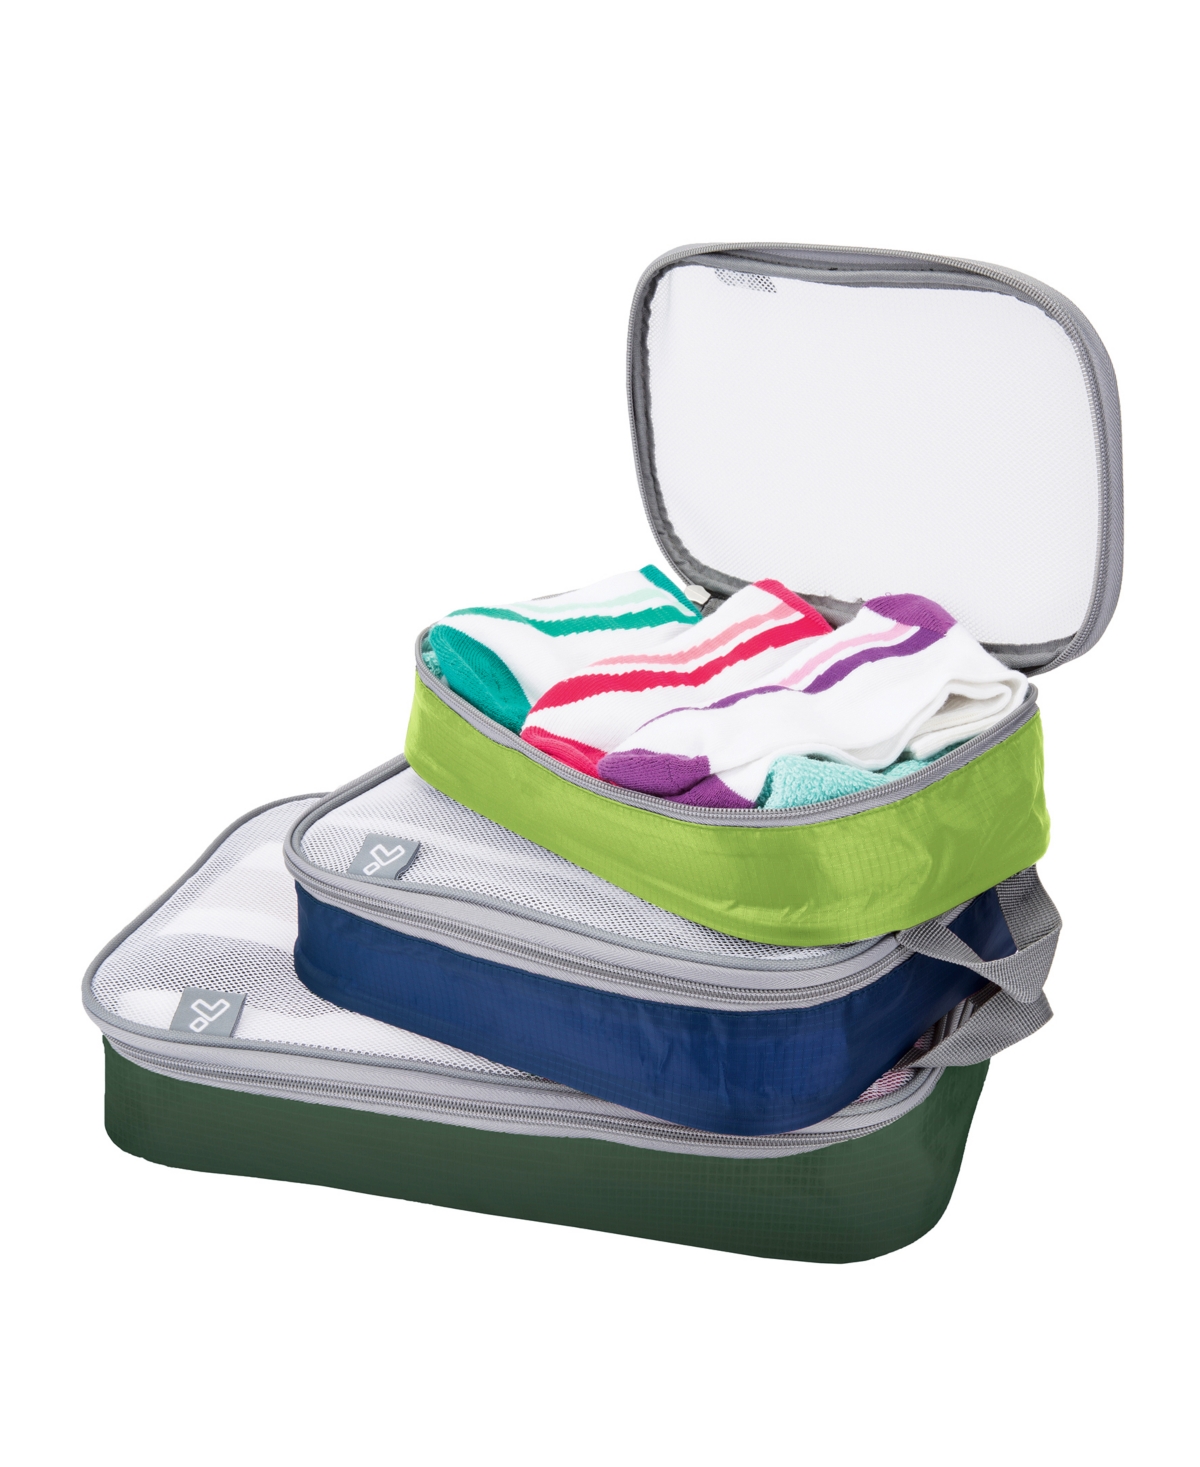 Shop Travelon Set Of 3 Packing Organizers In Bold